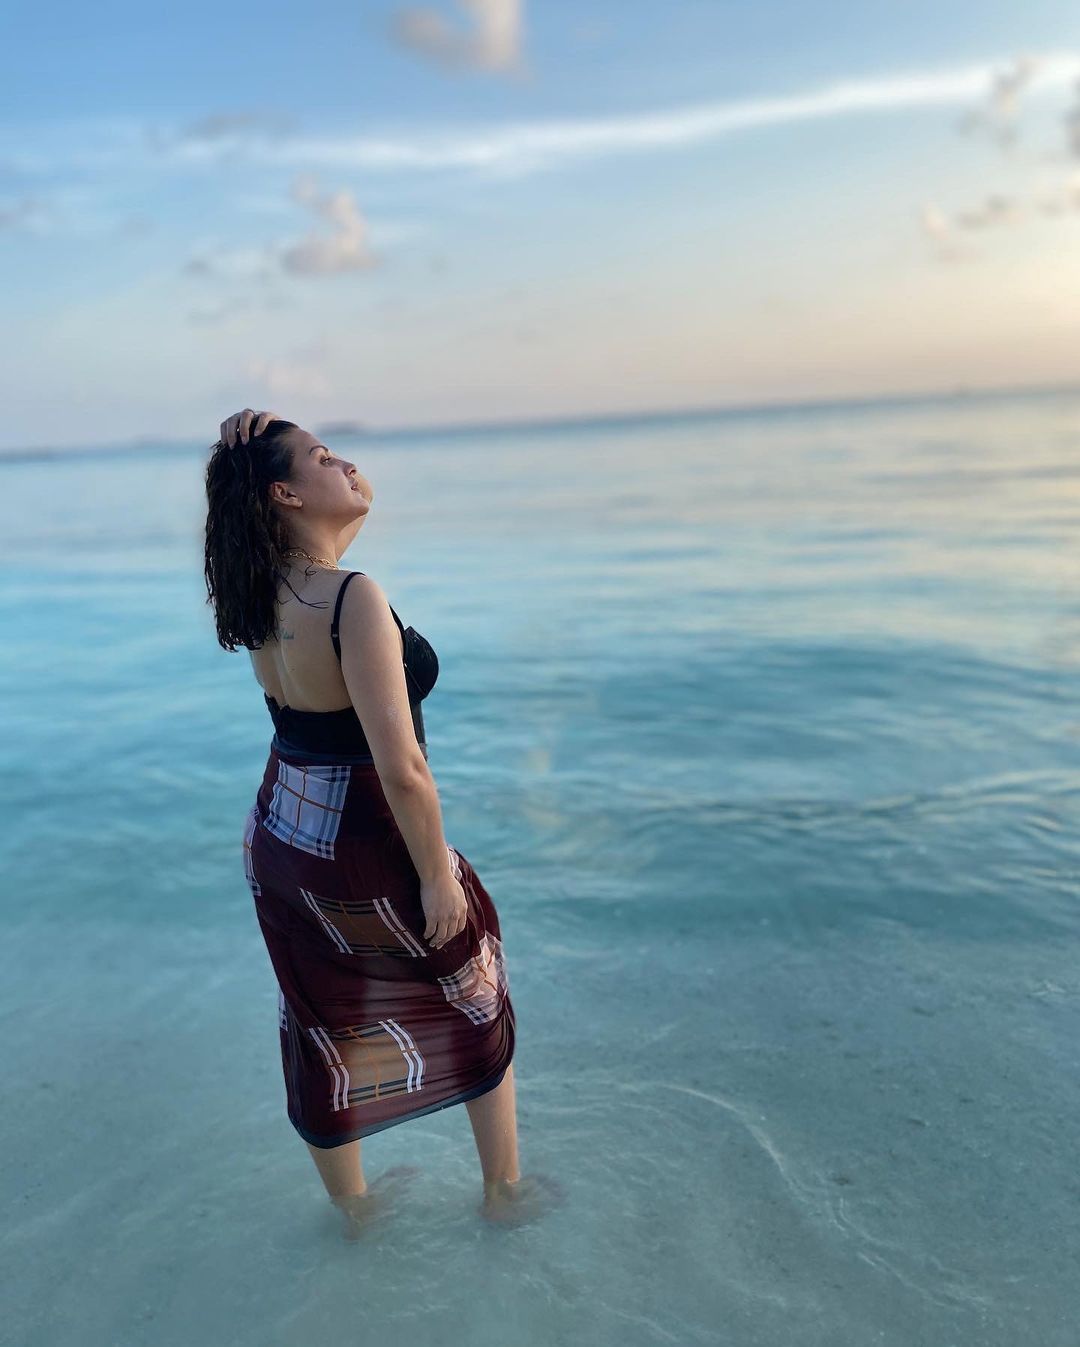 Himanshi Khurana is a breathtaking sight as she stands in the ocean